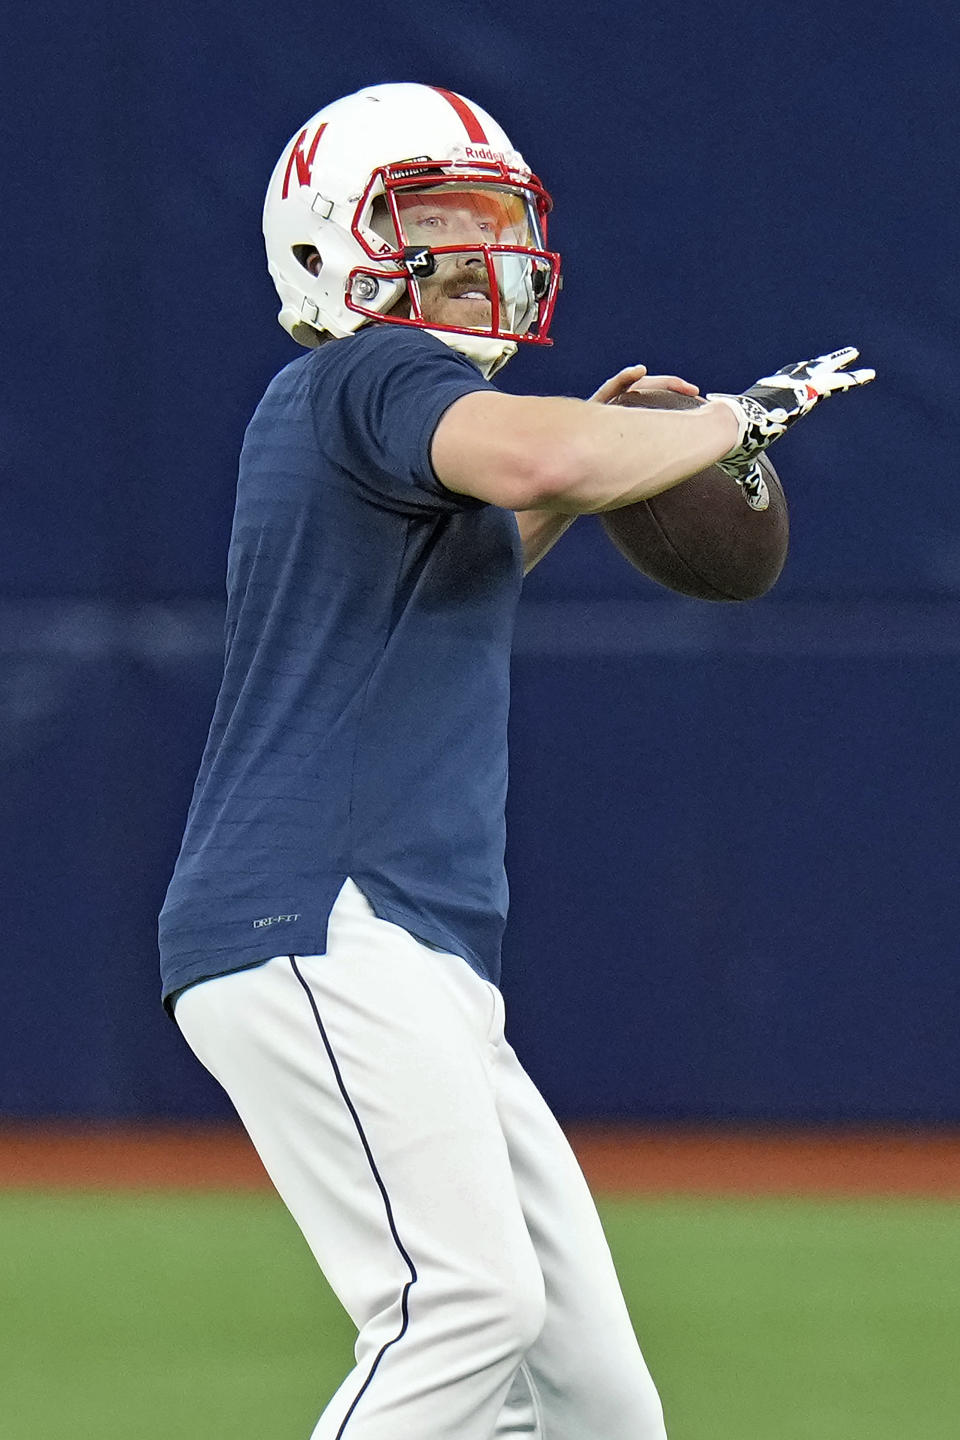 Tampa Bay Rays relief pitcher Jake Diekman dons a University of Nebraska football helmet as he throws the ball while warming up before a baseball game against the Los Angeles Angels Wednesday, Sept. 20, 2023, in St. Petersburg, Fla. Diekman was born in Wymore, Nebraska. (AP Photo/Chris O'Meara)